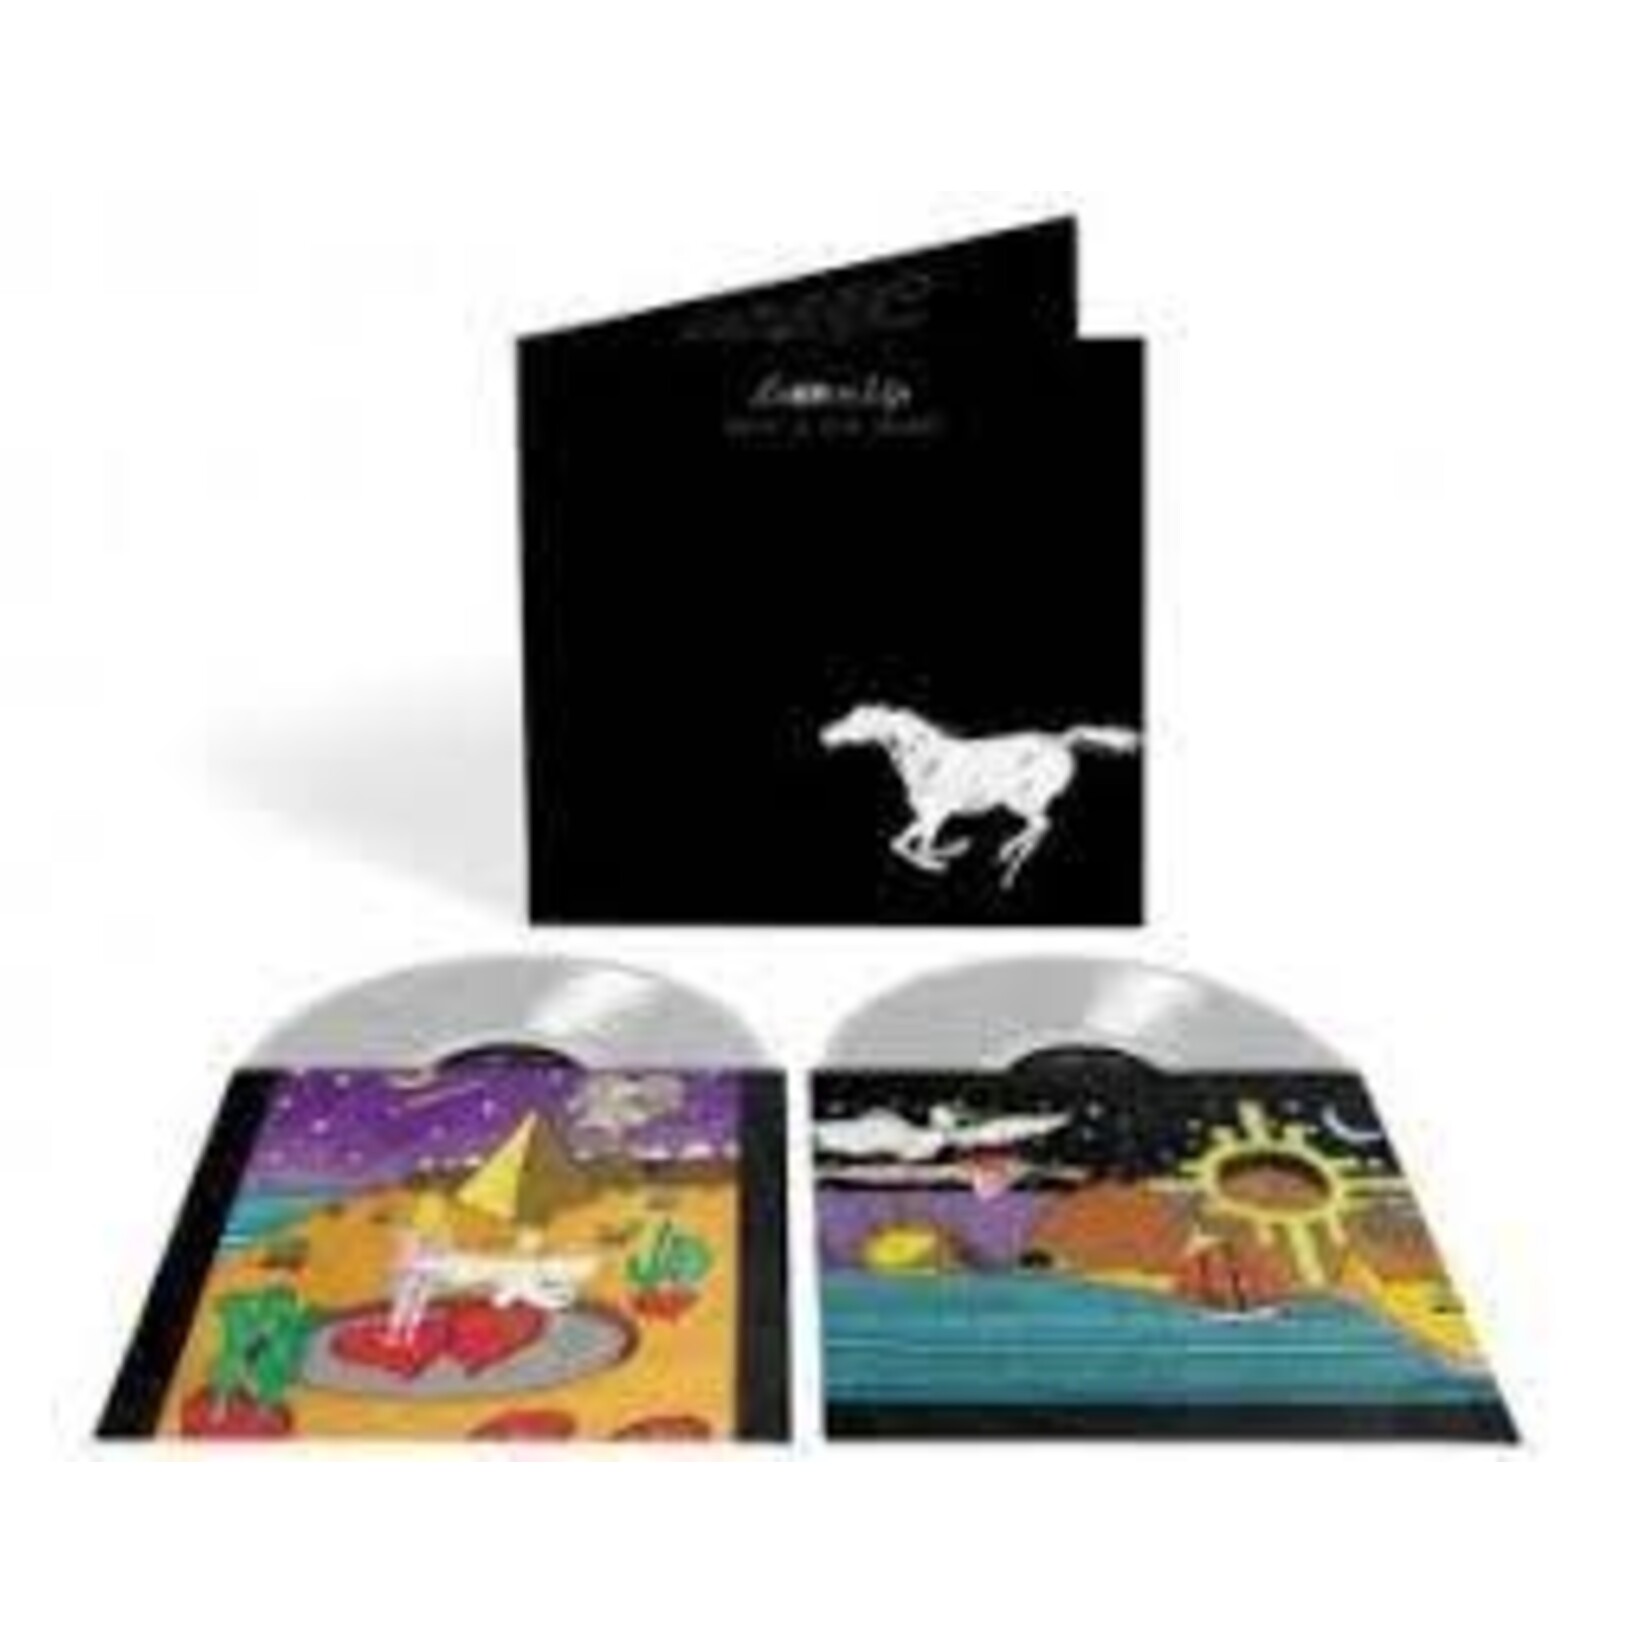 NEIL YOUNG & CRAZY HORSE - FU##IN' UP 2LP